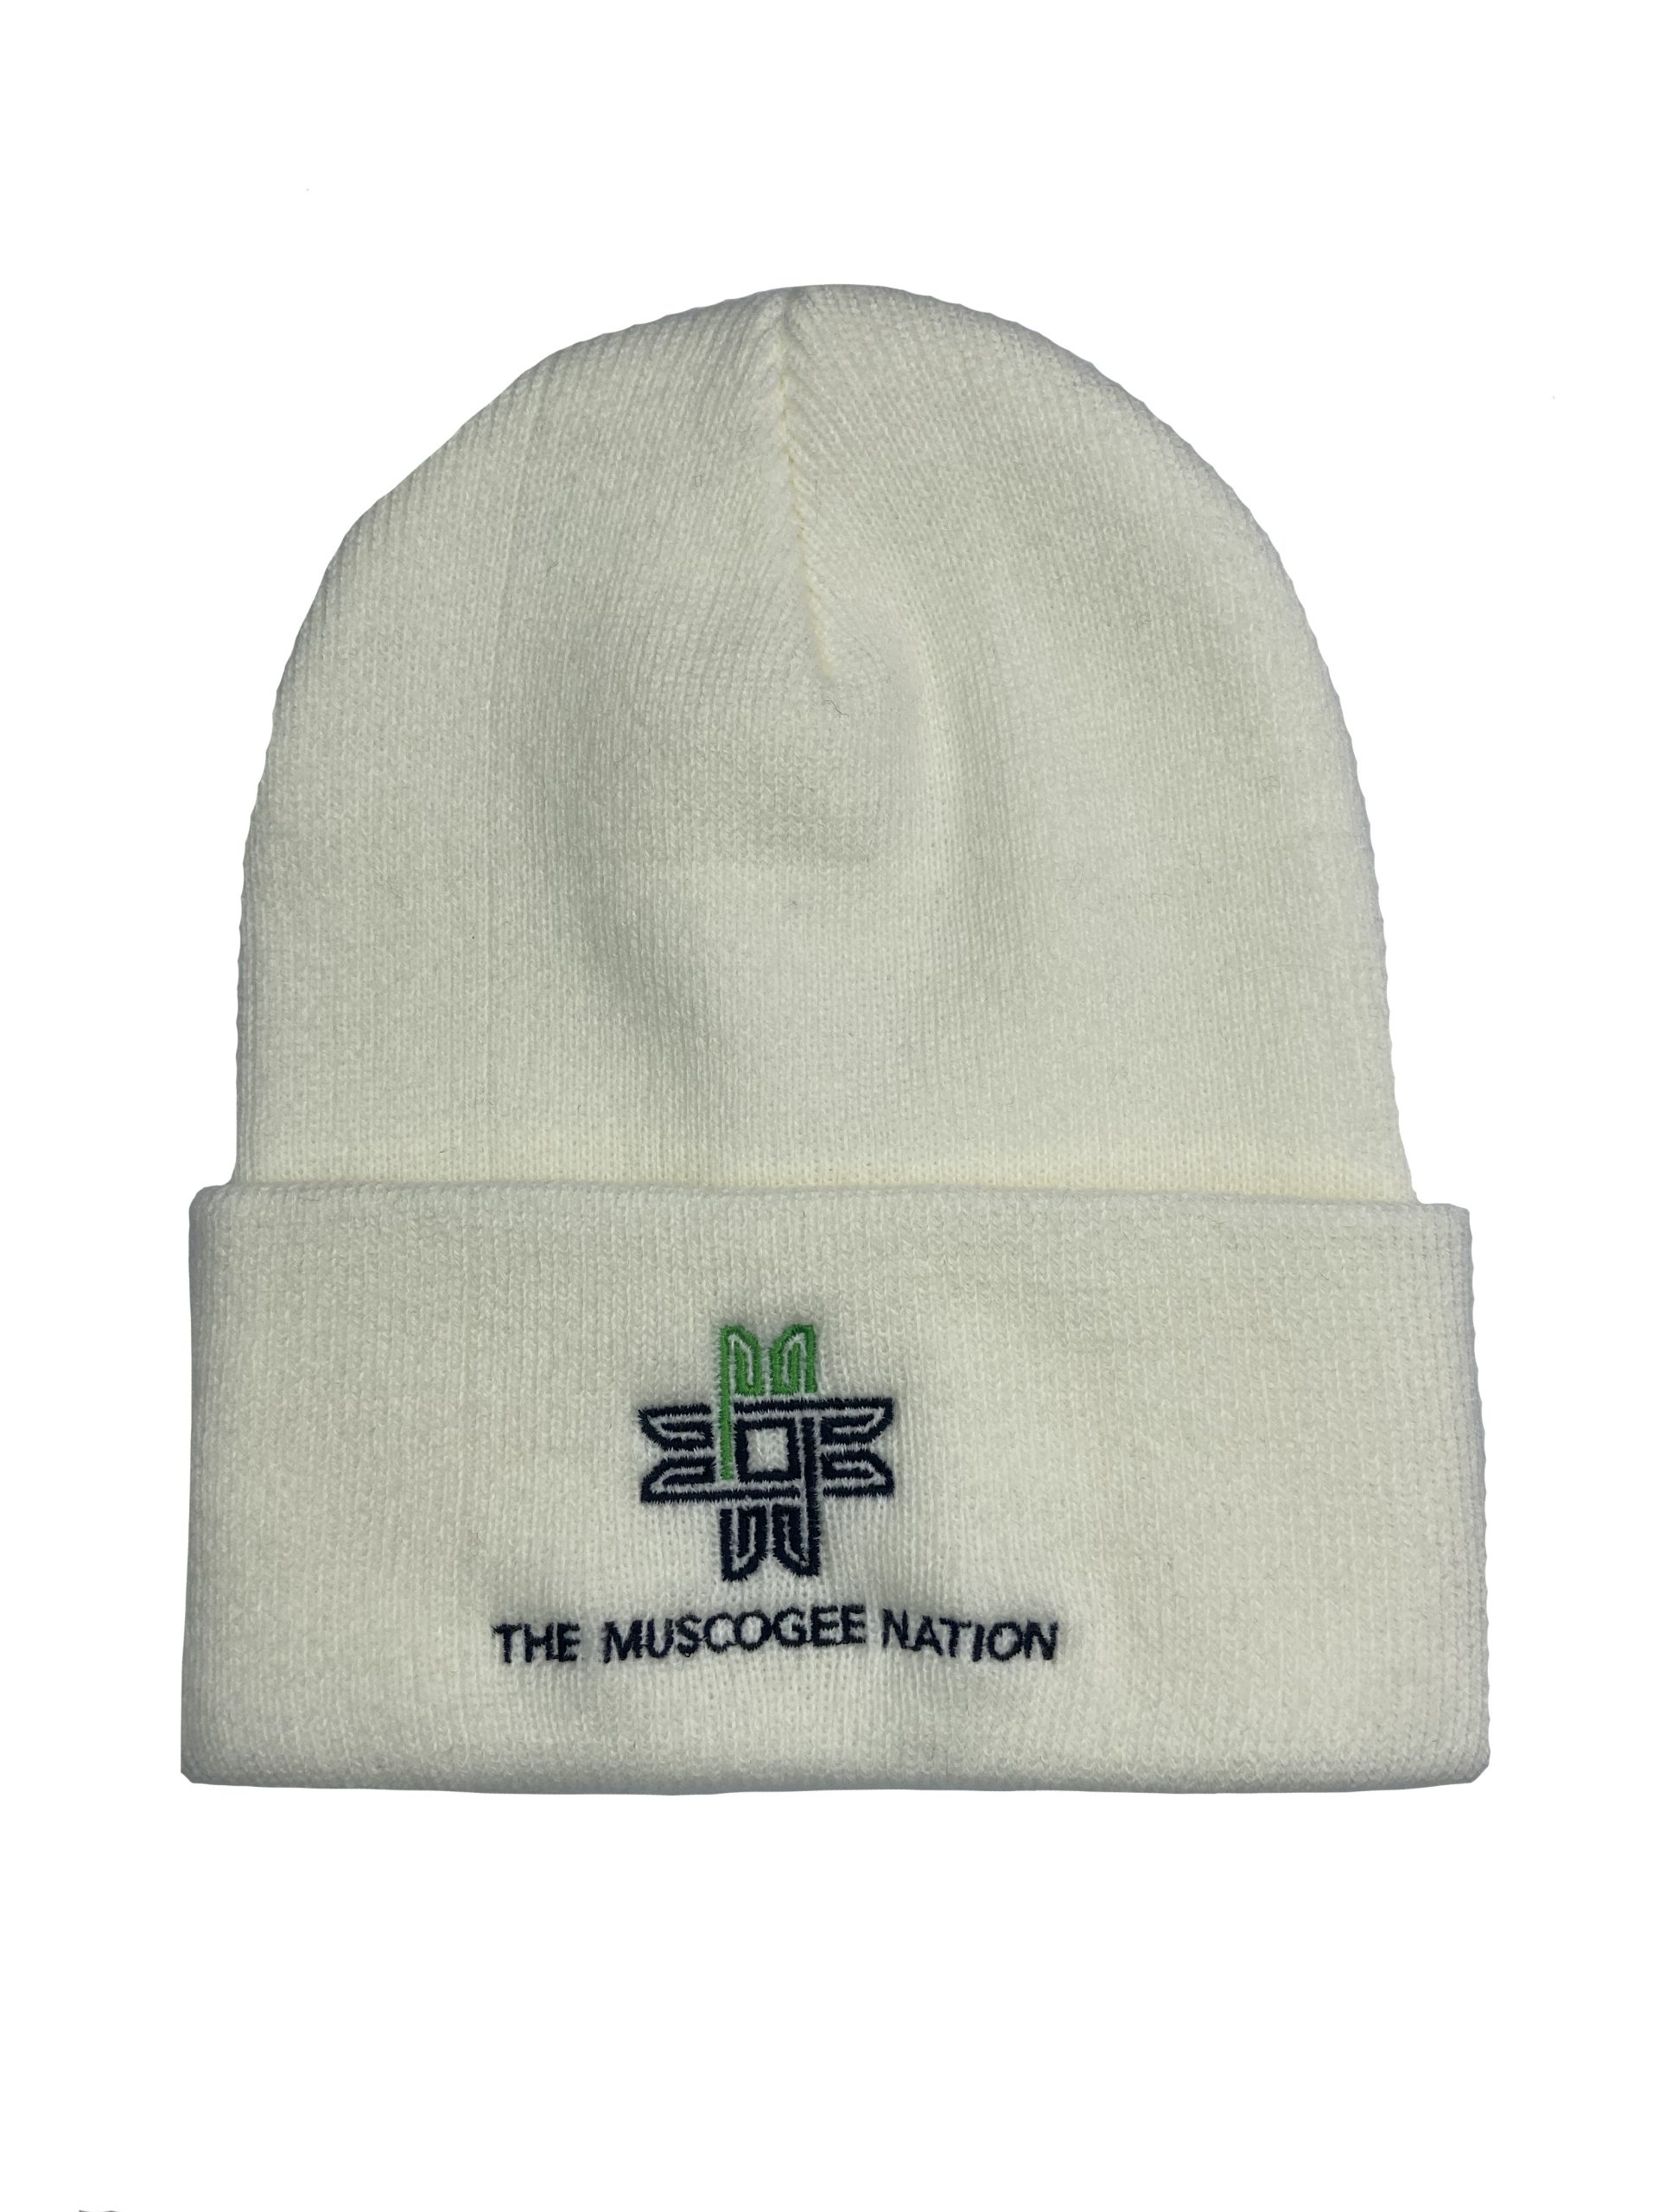 White Port & Company Beanie : Visit the Muscogee Nation